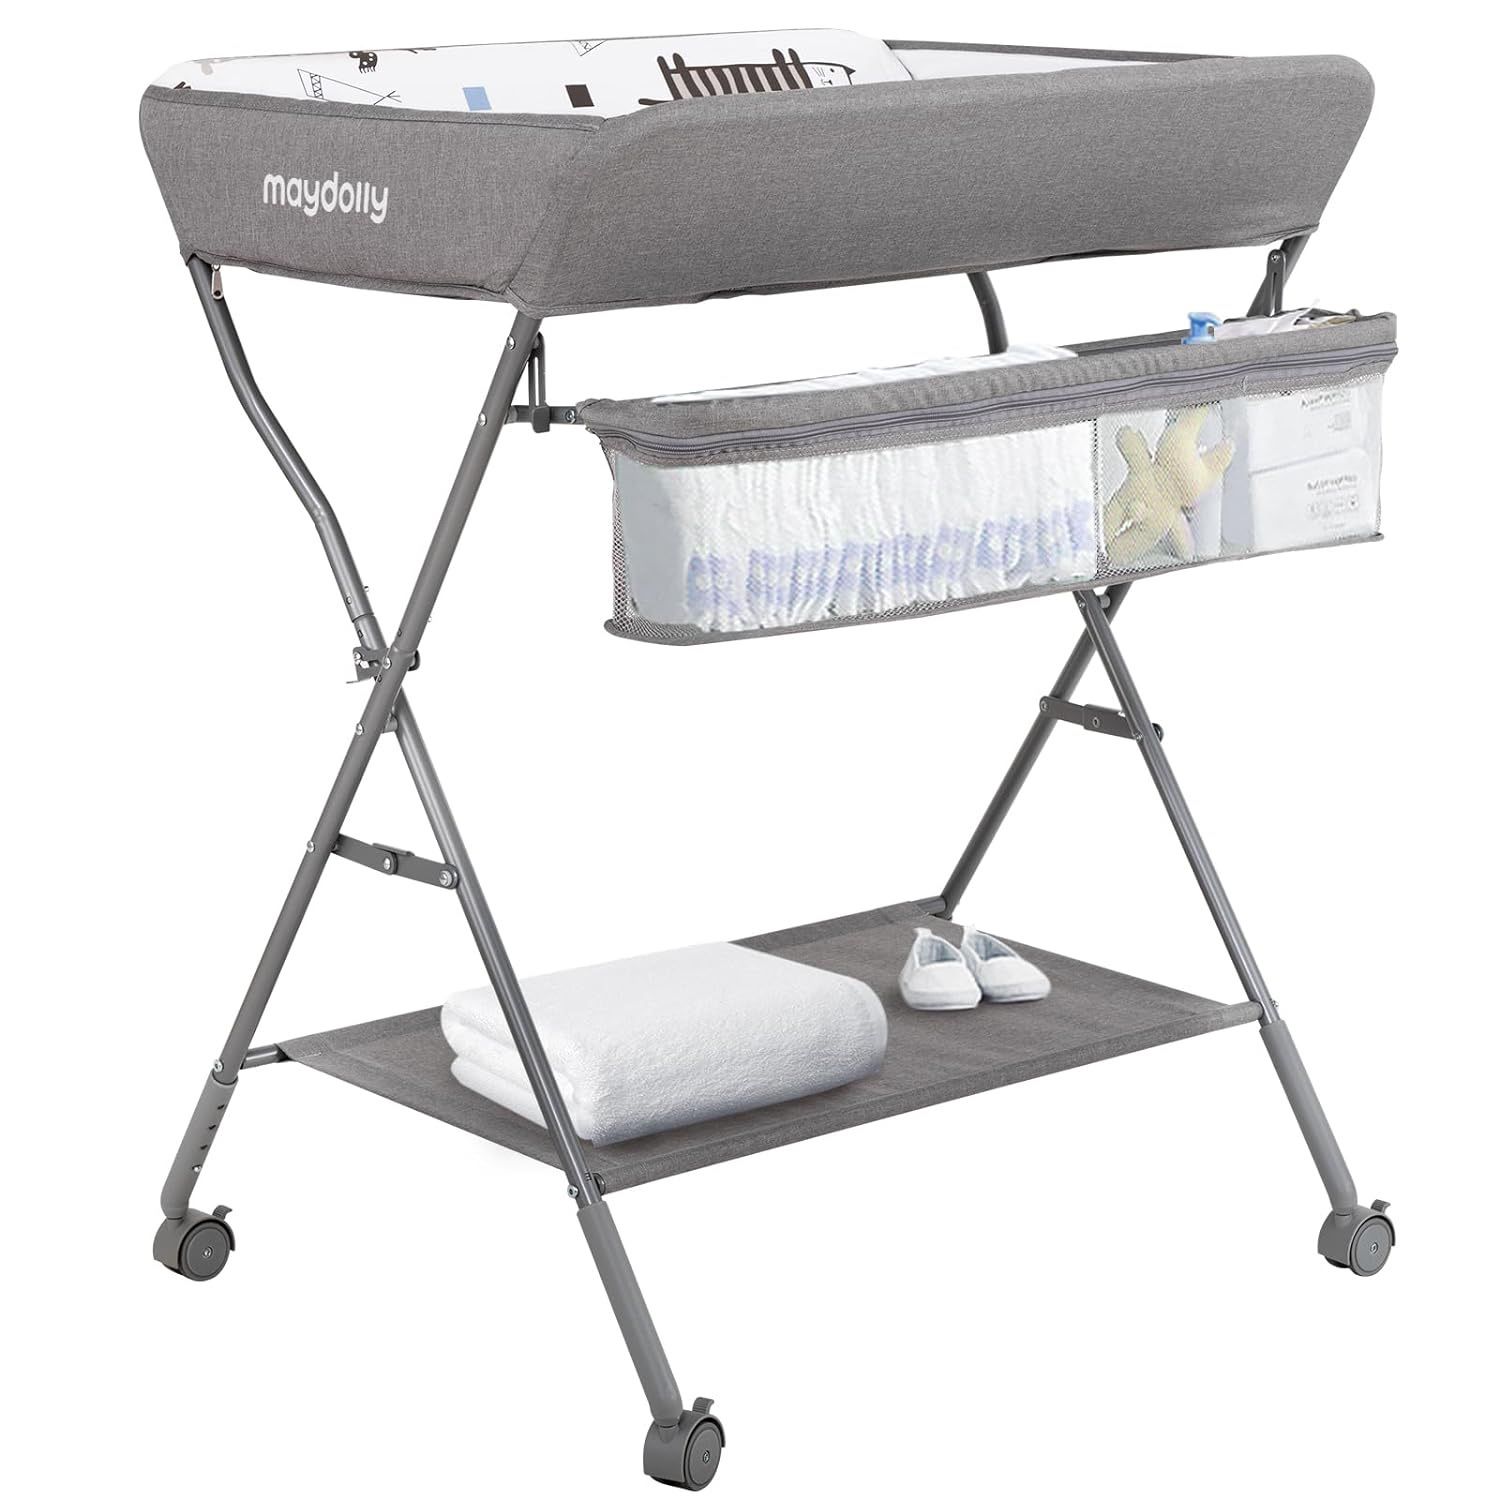 Maydolly Baby Changing Table with Wheels, Maydolly Portable Adjustable Height Folding Diaper Station with Nursery Organizer & Storage Rack for Newborn